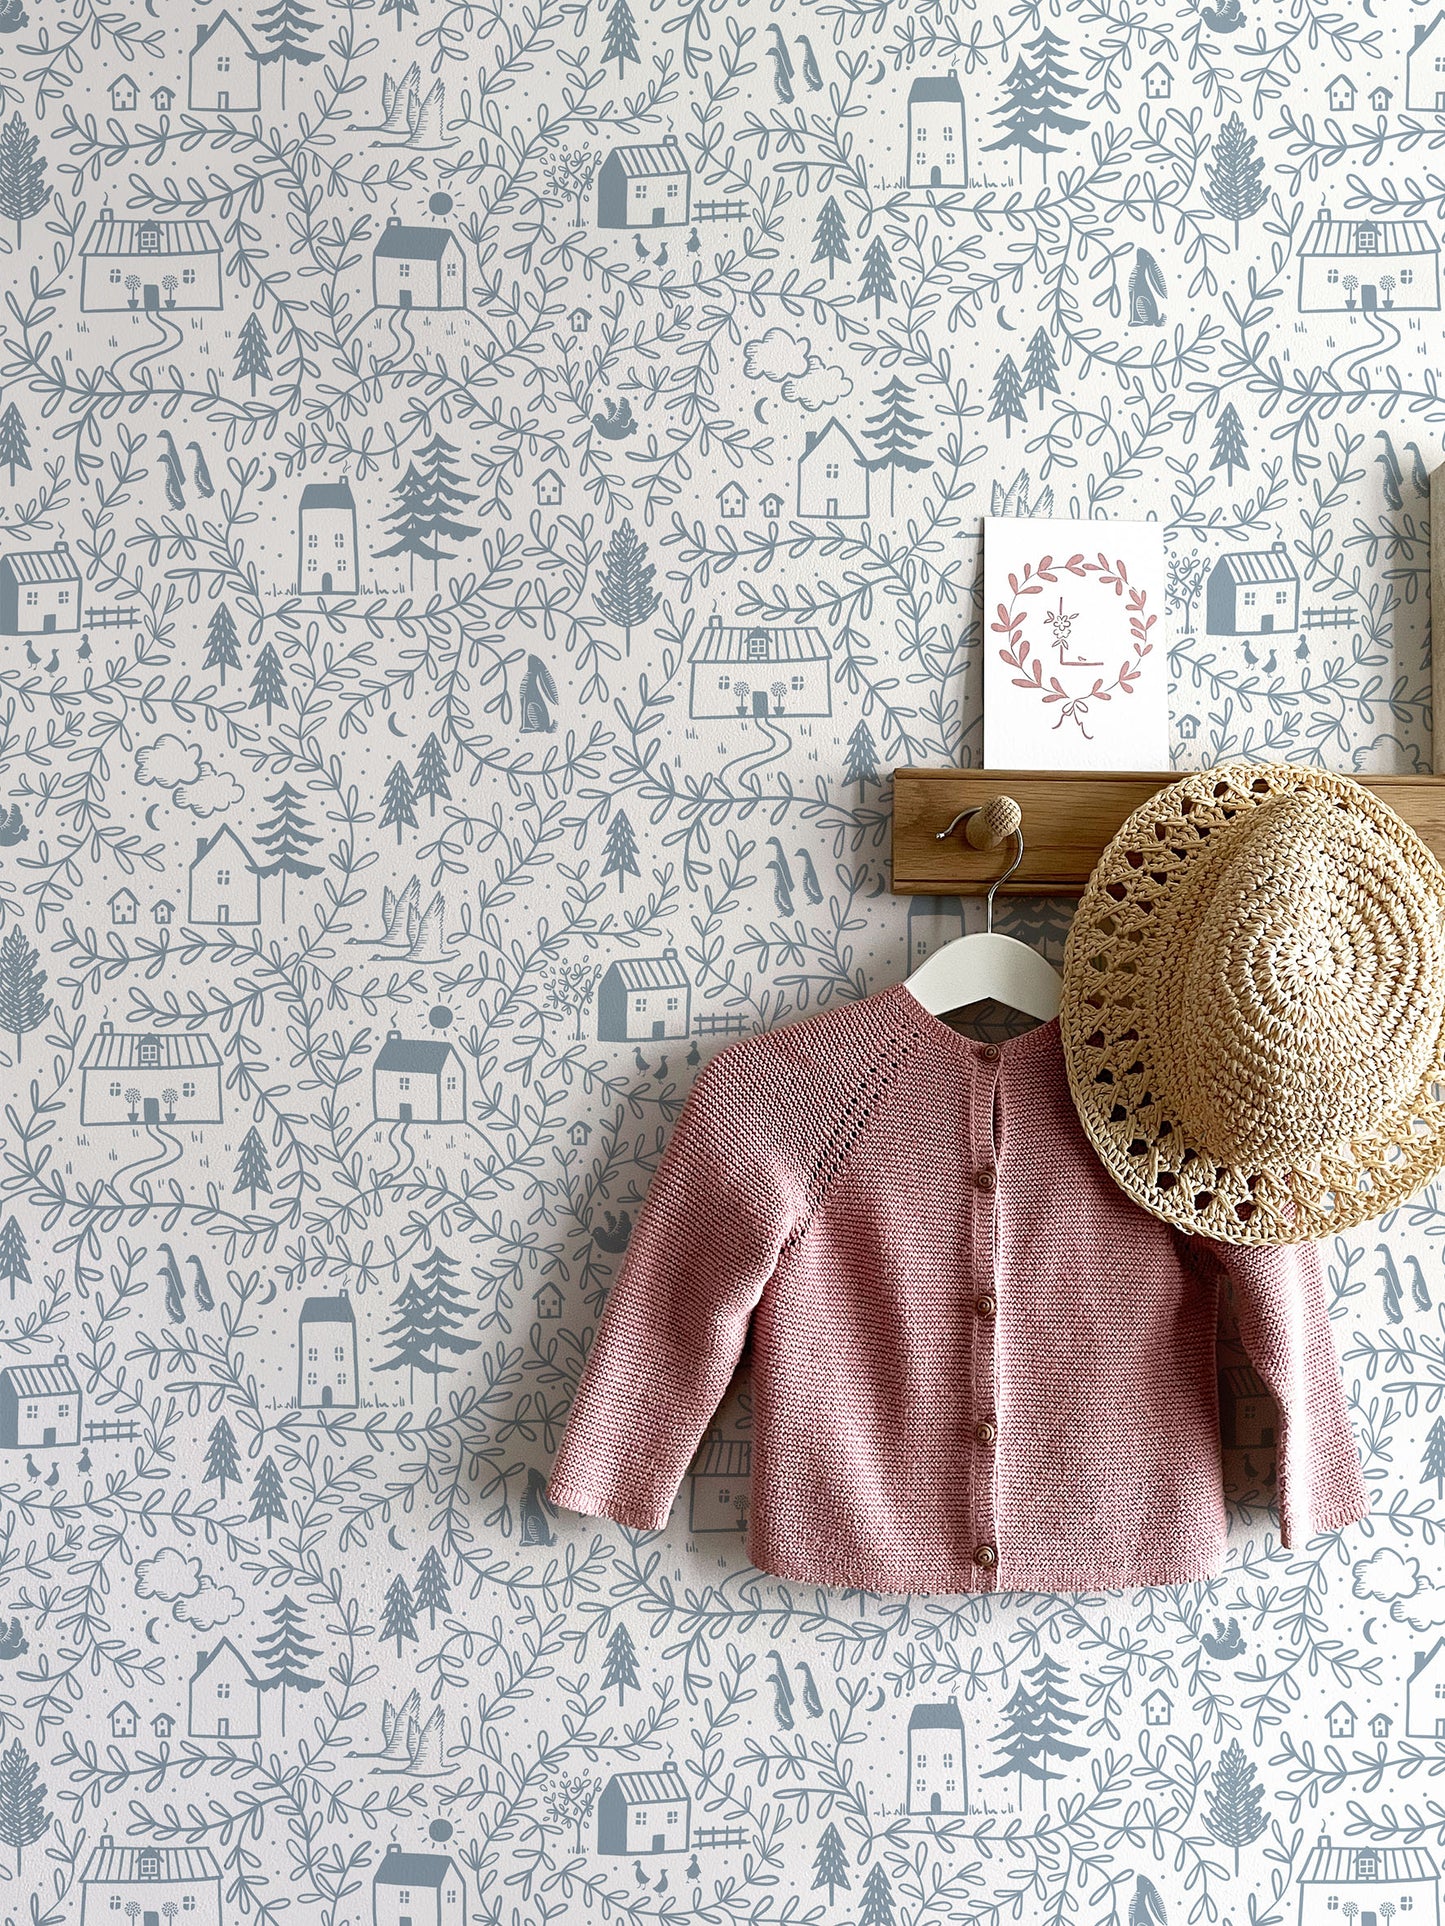 Cottages in the Woods blue dusk wallpaper with hooks, hanging pink baby cardigan and sun hat